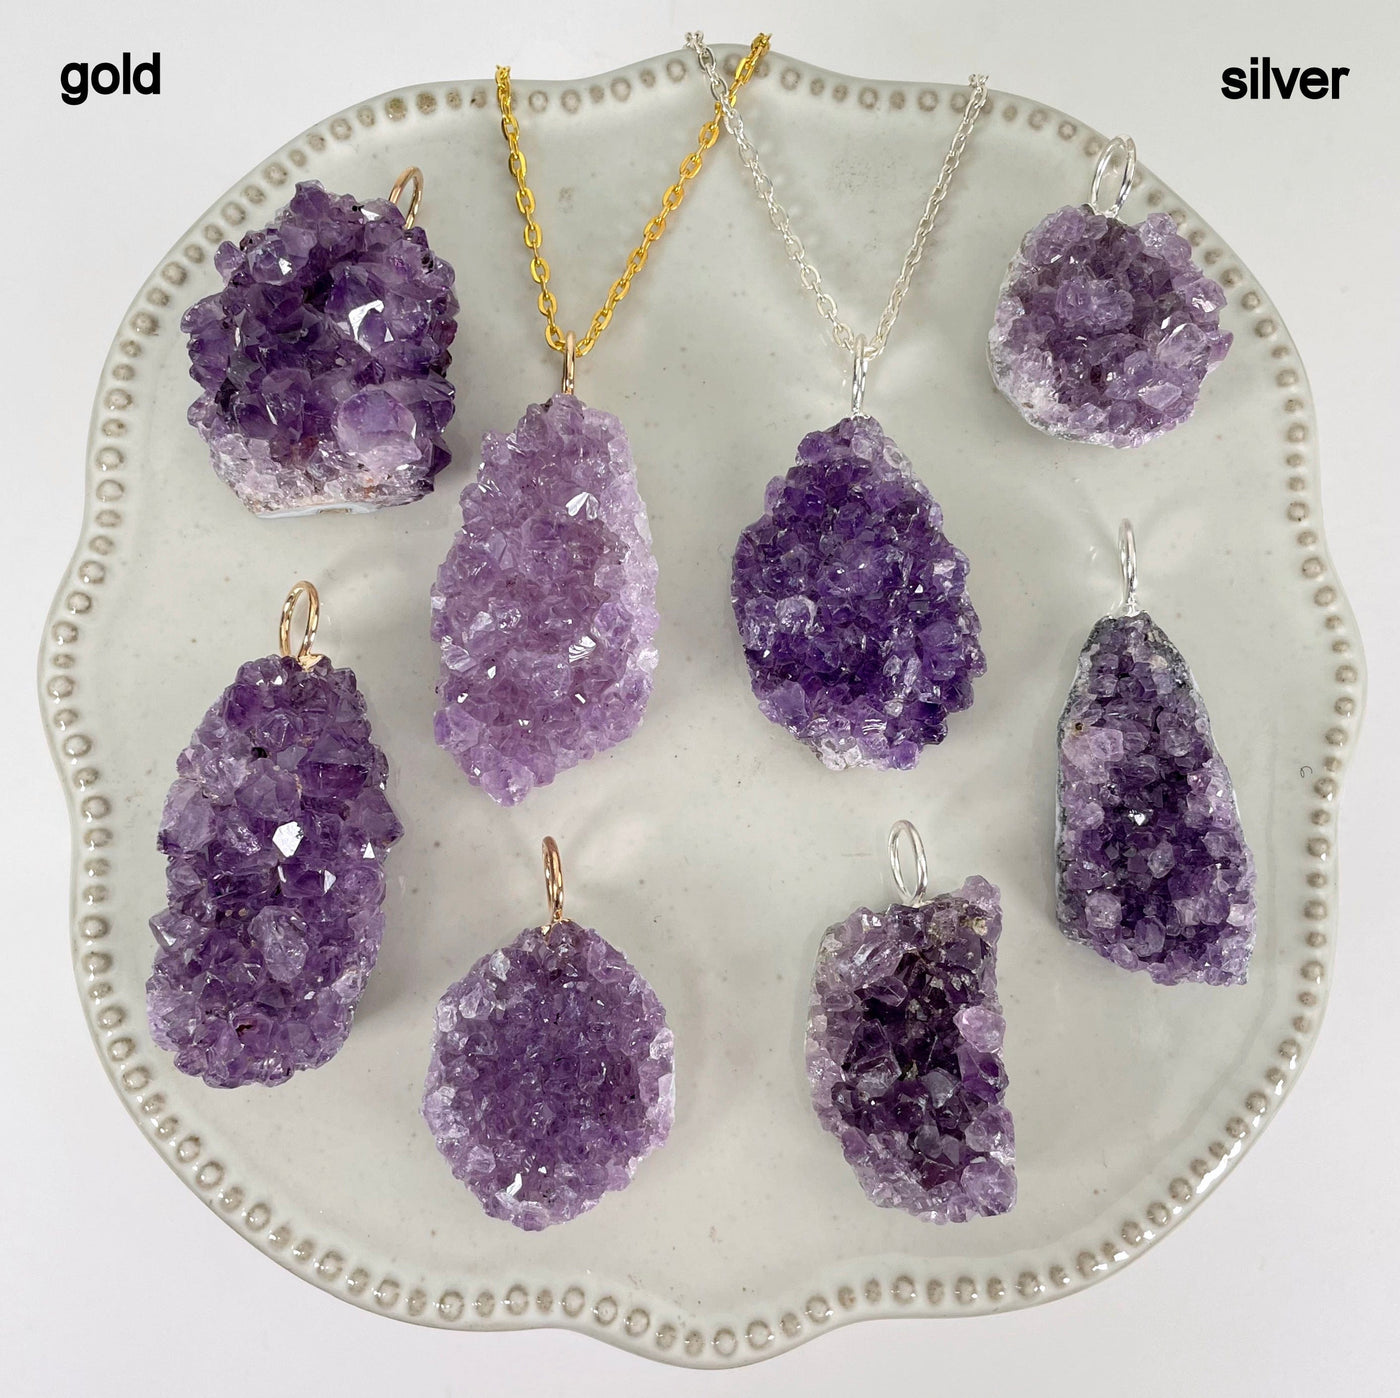 gold and silver amethyst druzy cluster pendants on display for finish comparison 